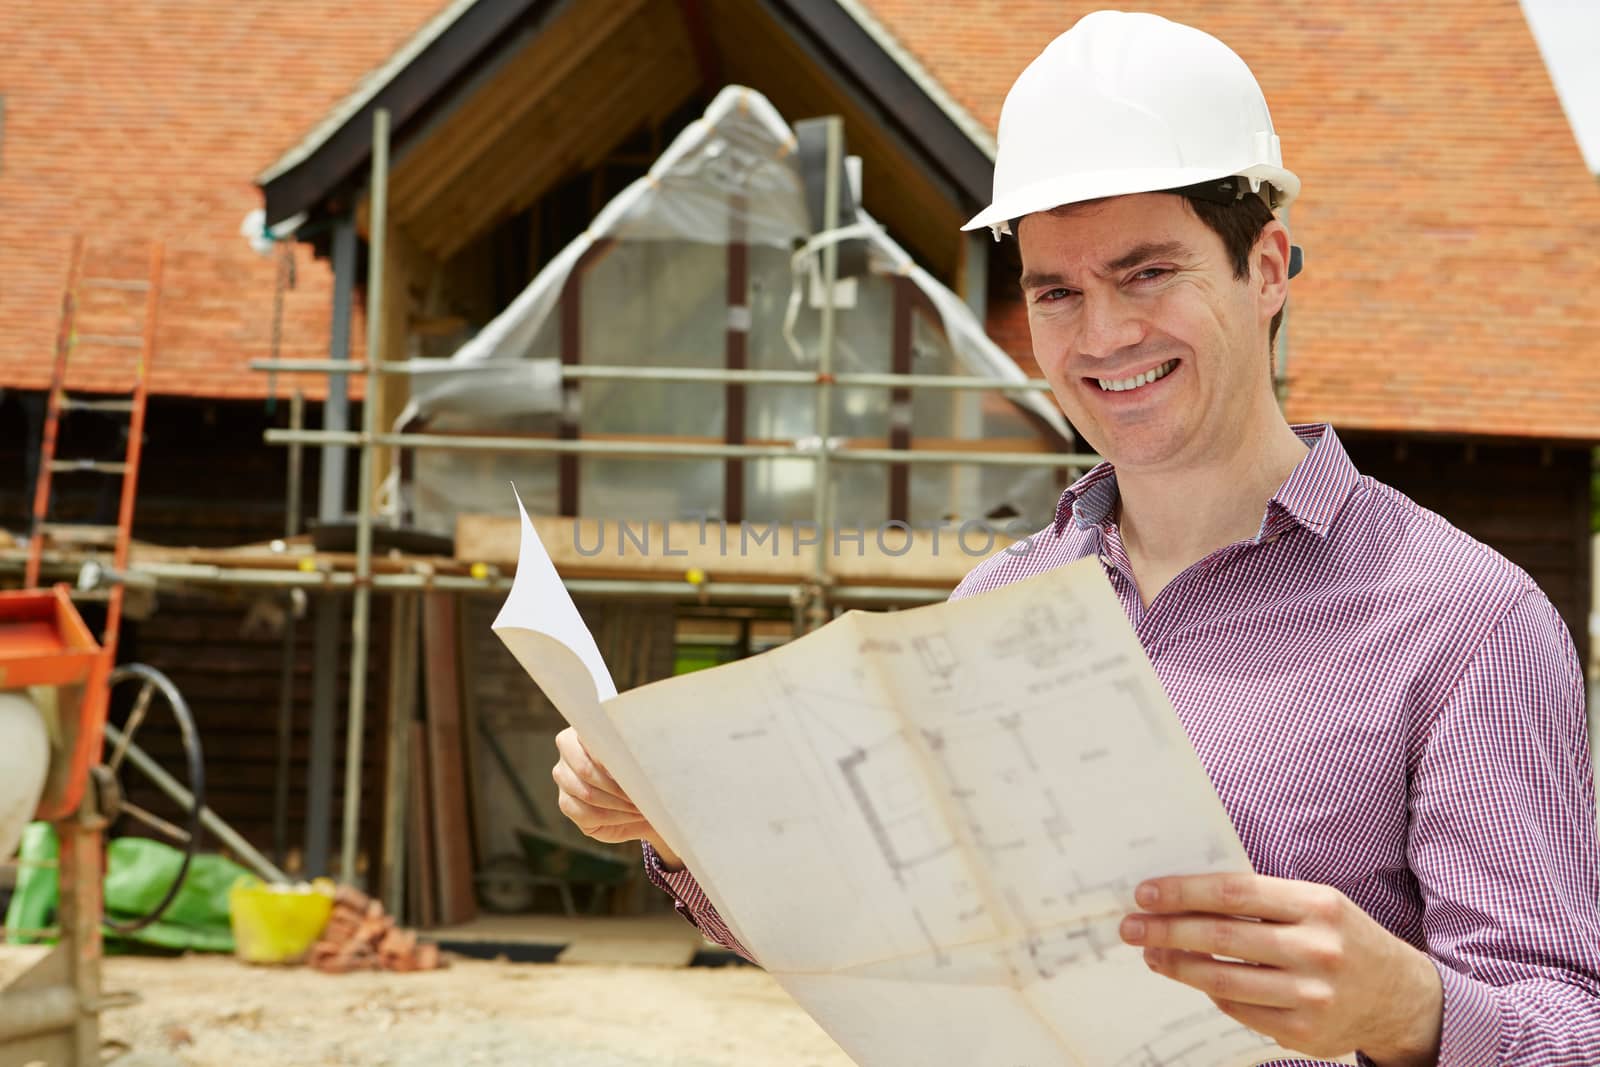 Portrait Of Architect On Building Site Looking At House Plans